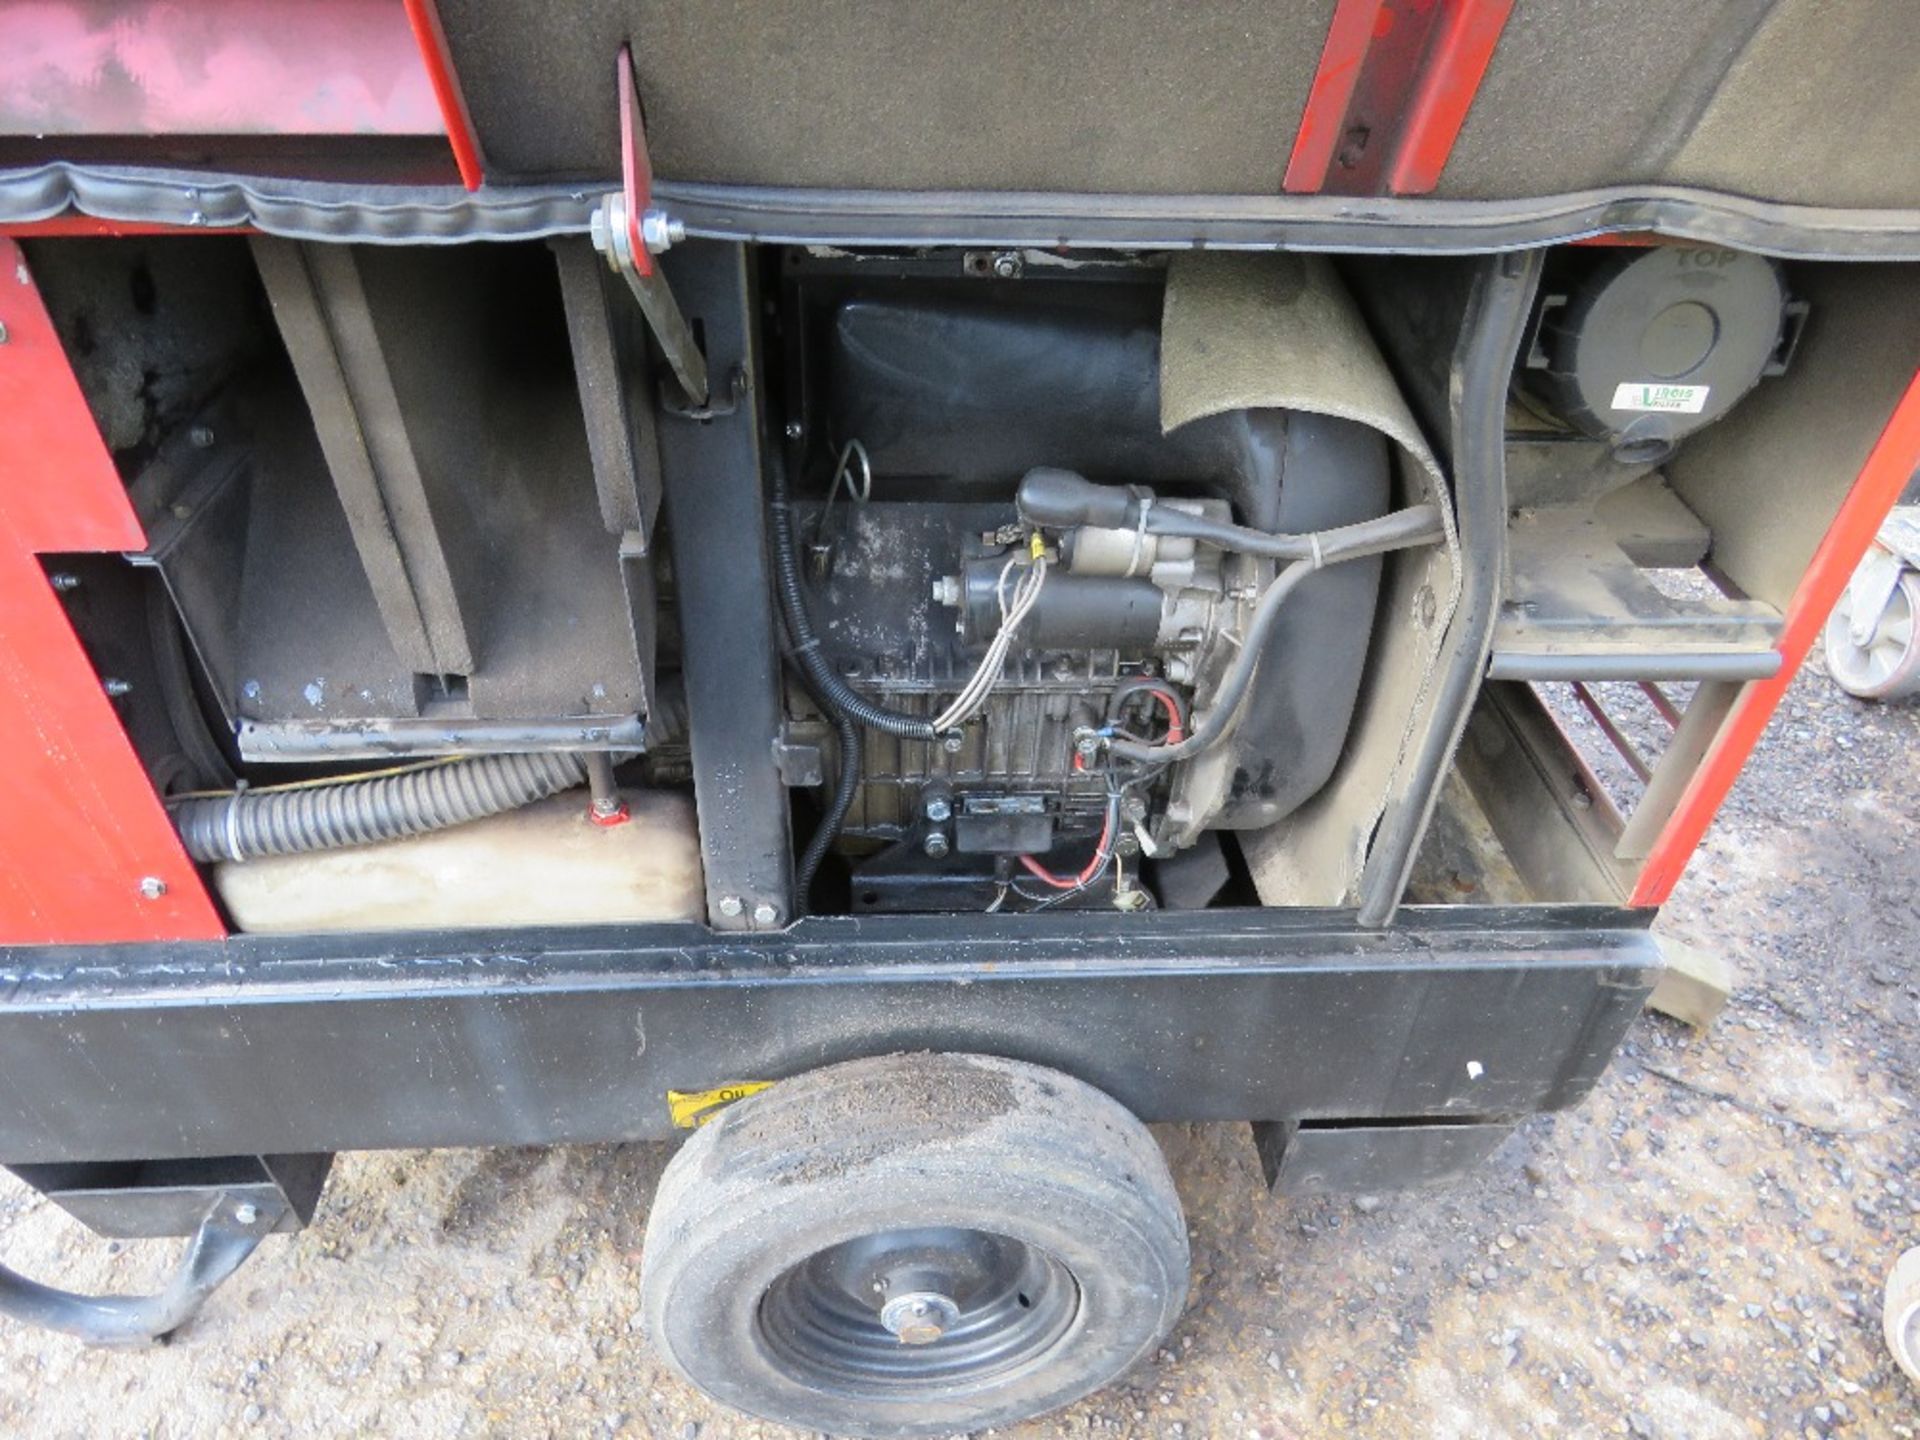 MOSA WELDER GENERATOR BARROW. WHEN TESTED WAS SEEN TO RUN BUT DID NOT SHOW OUTPUT (STARTER A BIT LAZ - Image 6 of 6